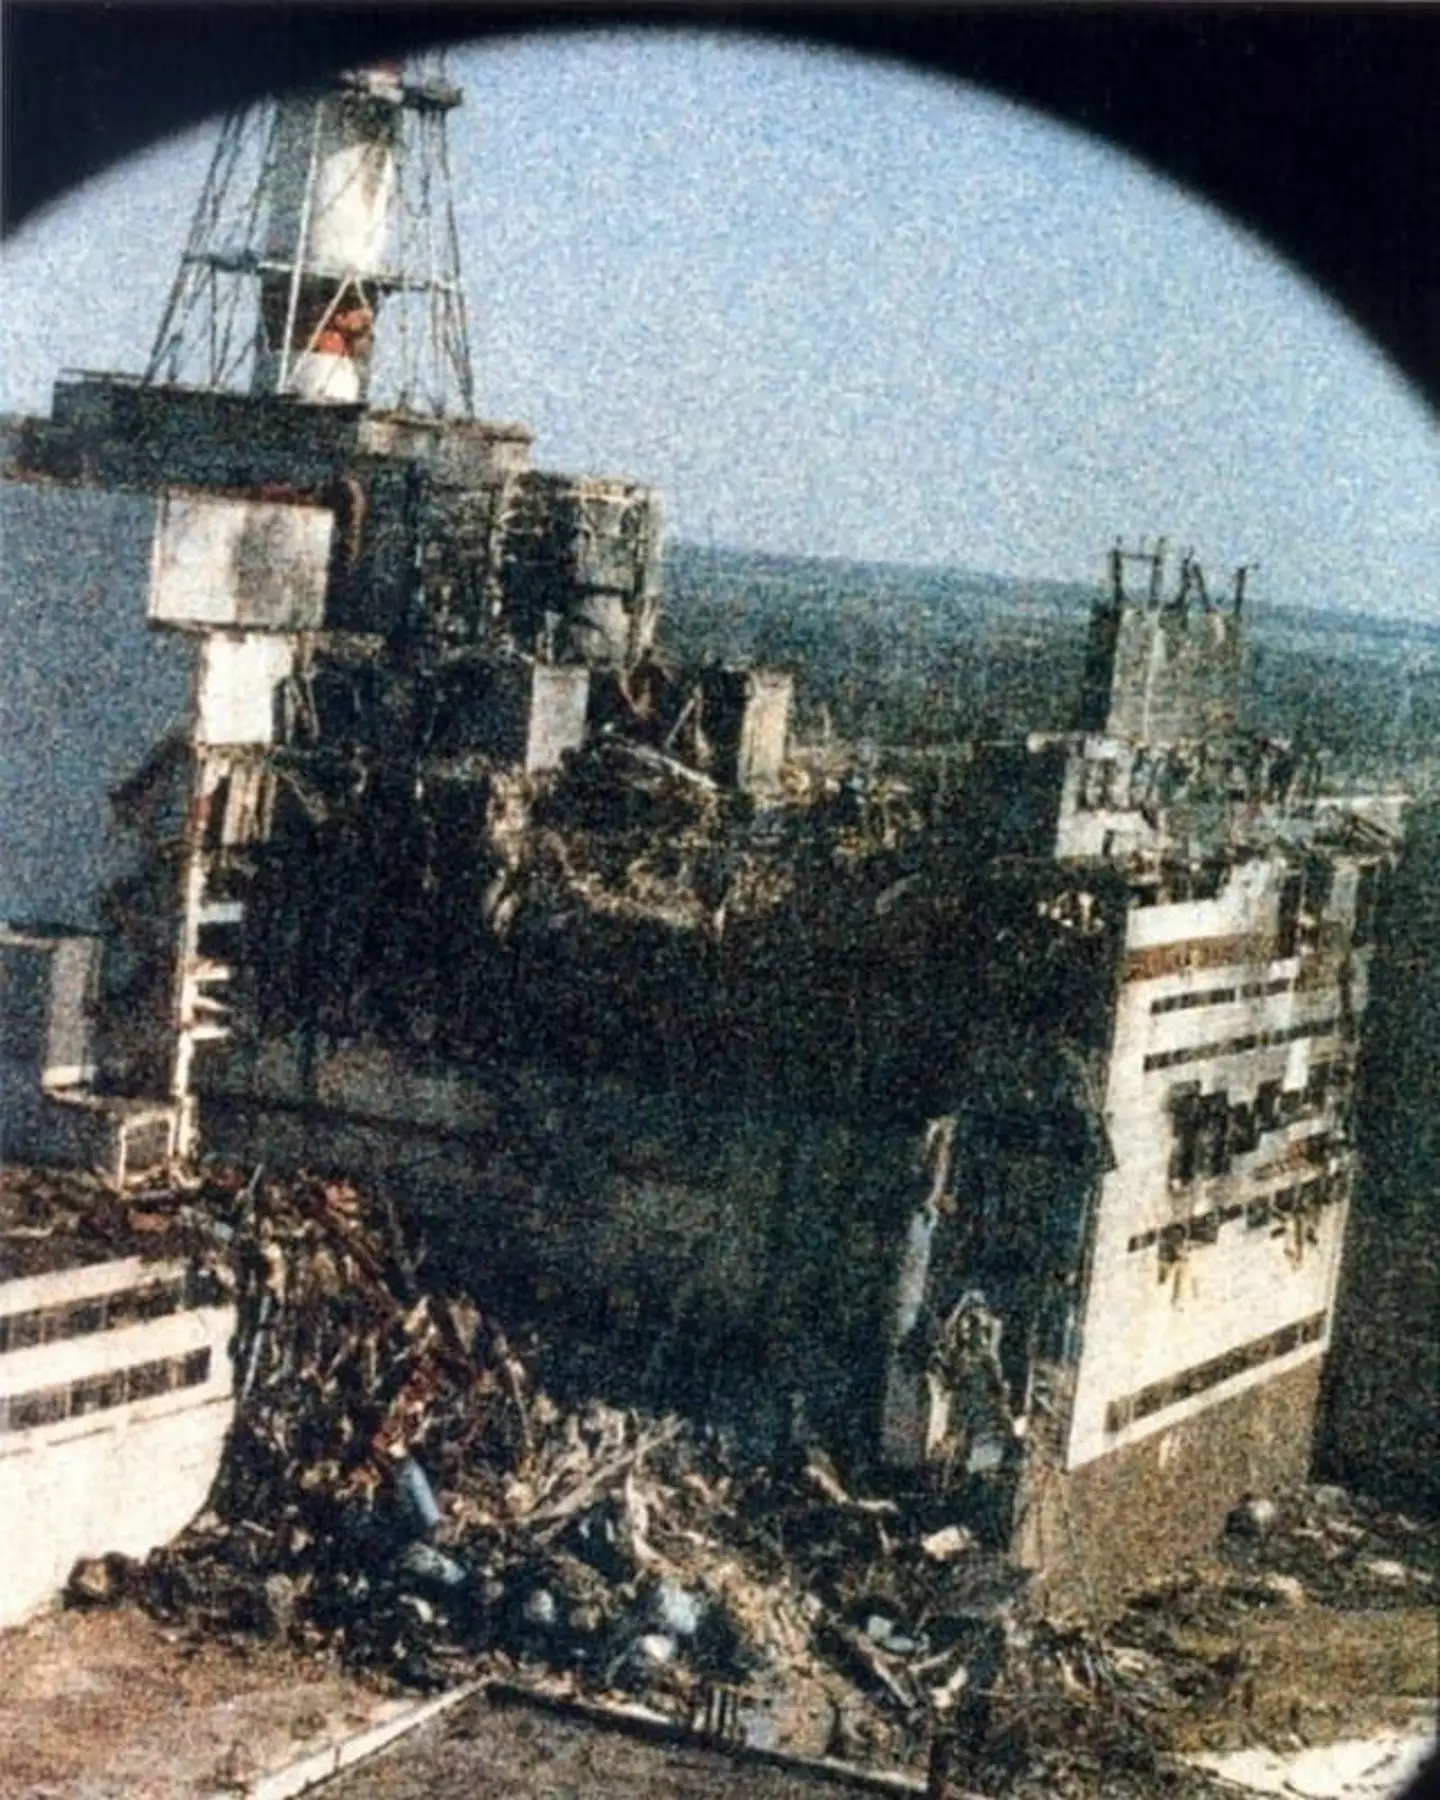 The first image taken of Chernobyl after the disaster.